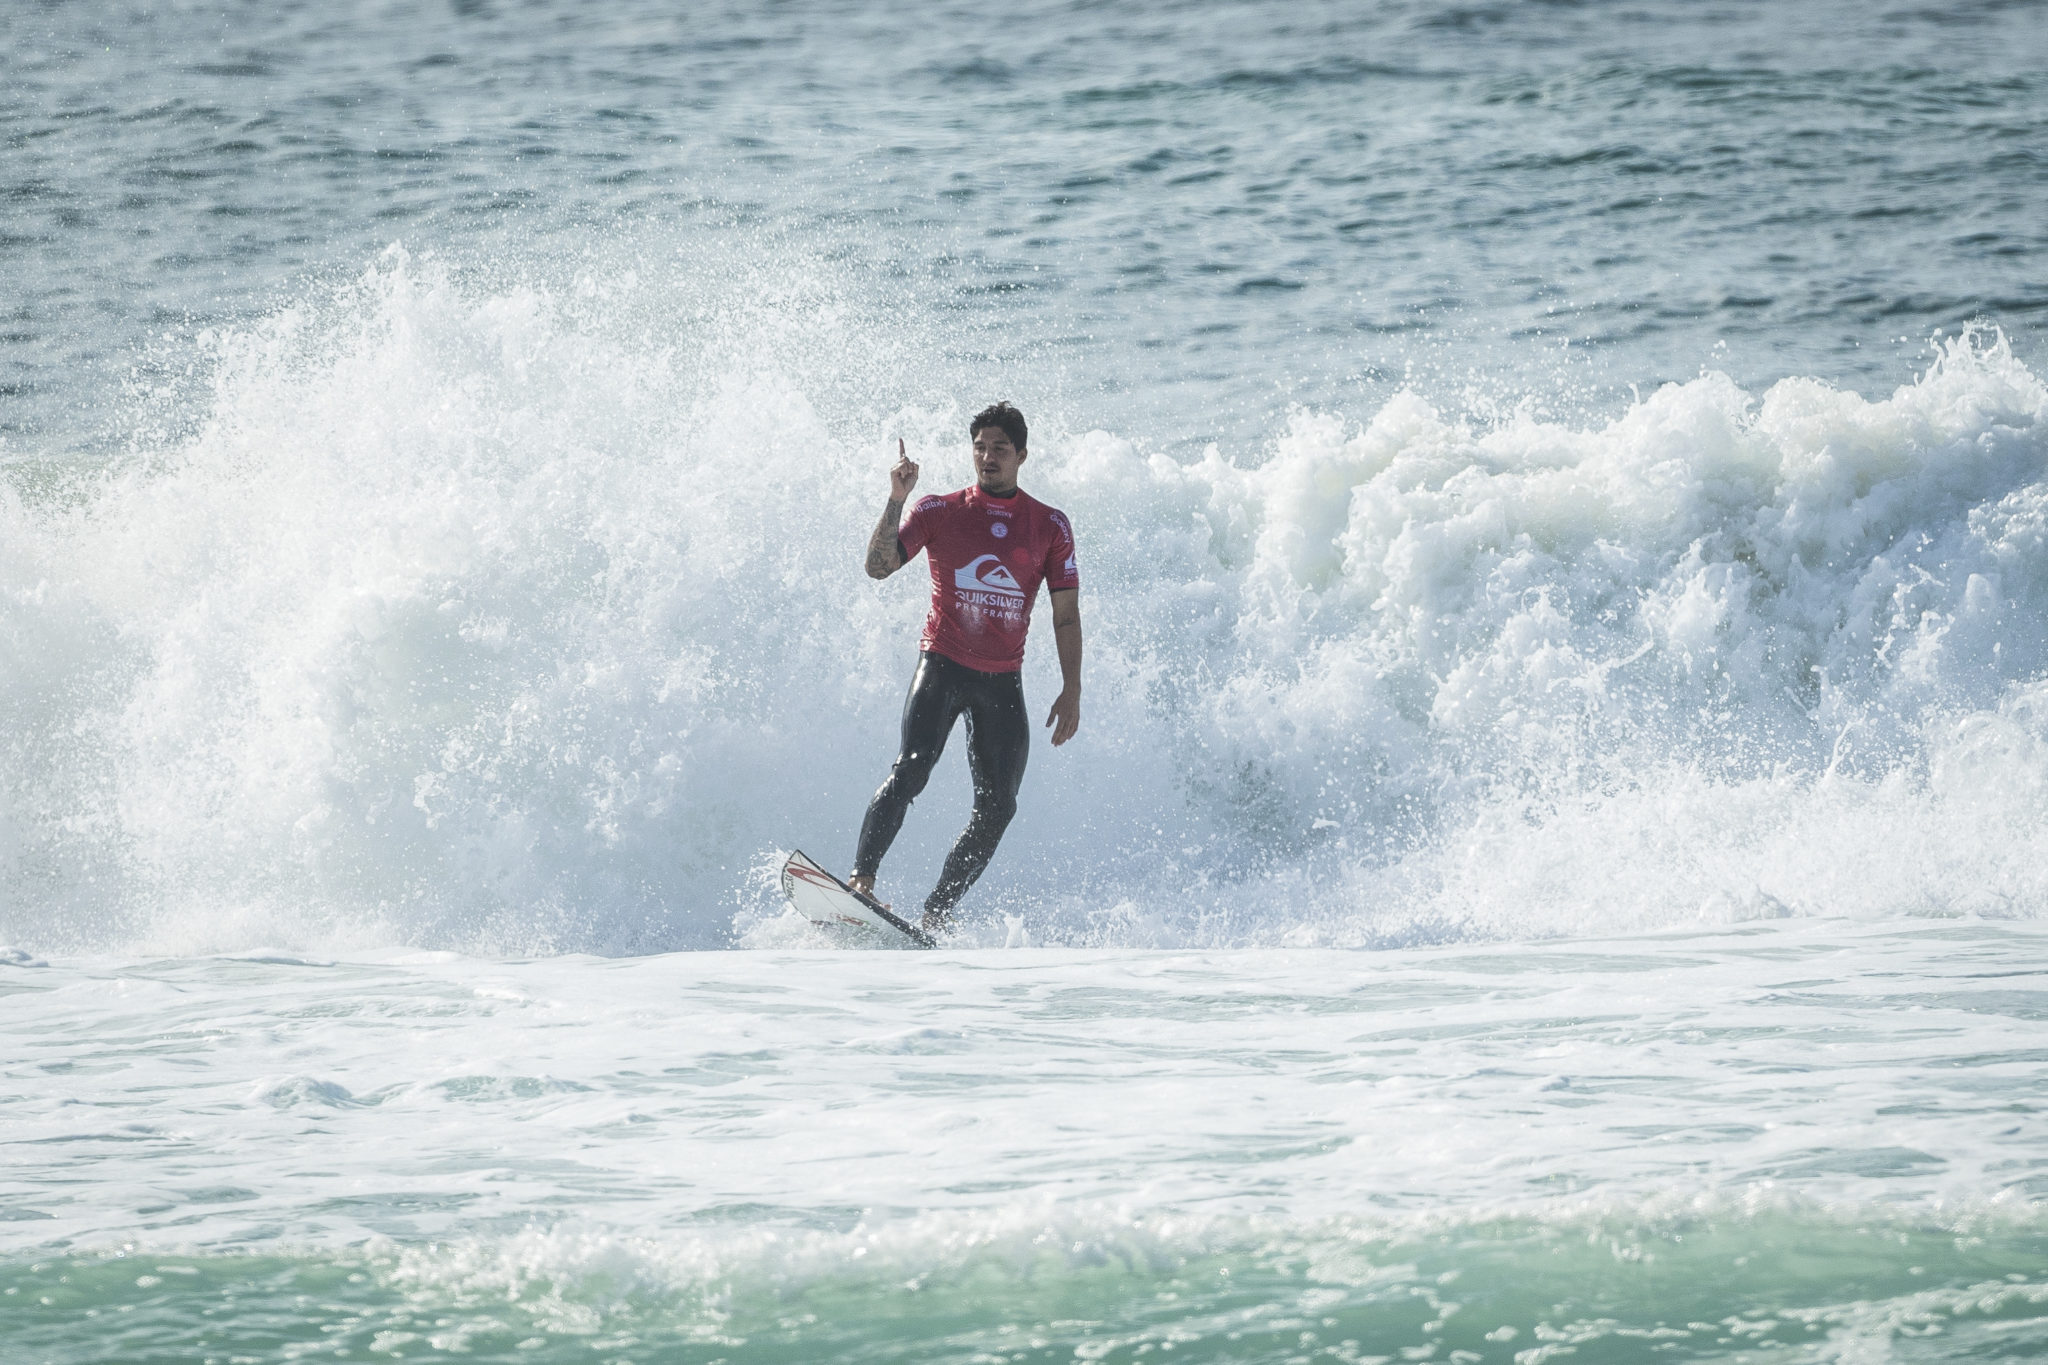 Gabriel Medina (BRA) Placed 1st  in Quarters 3 at Quiksilver Pro France 16